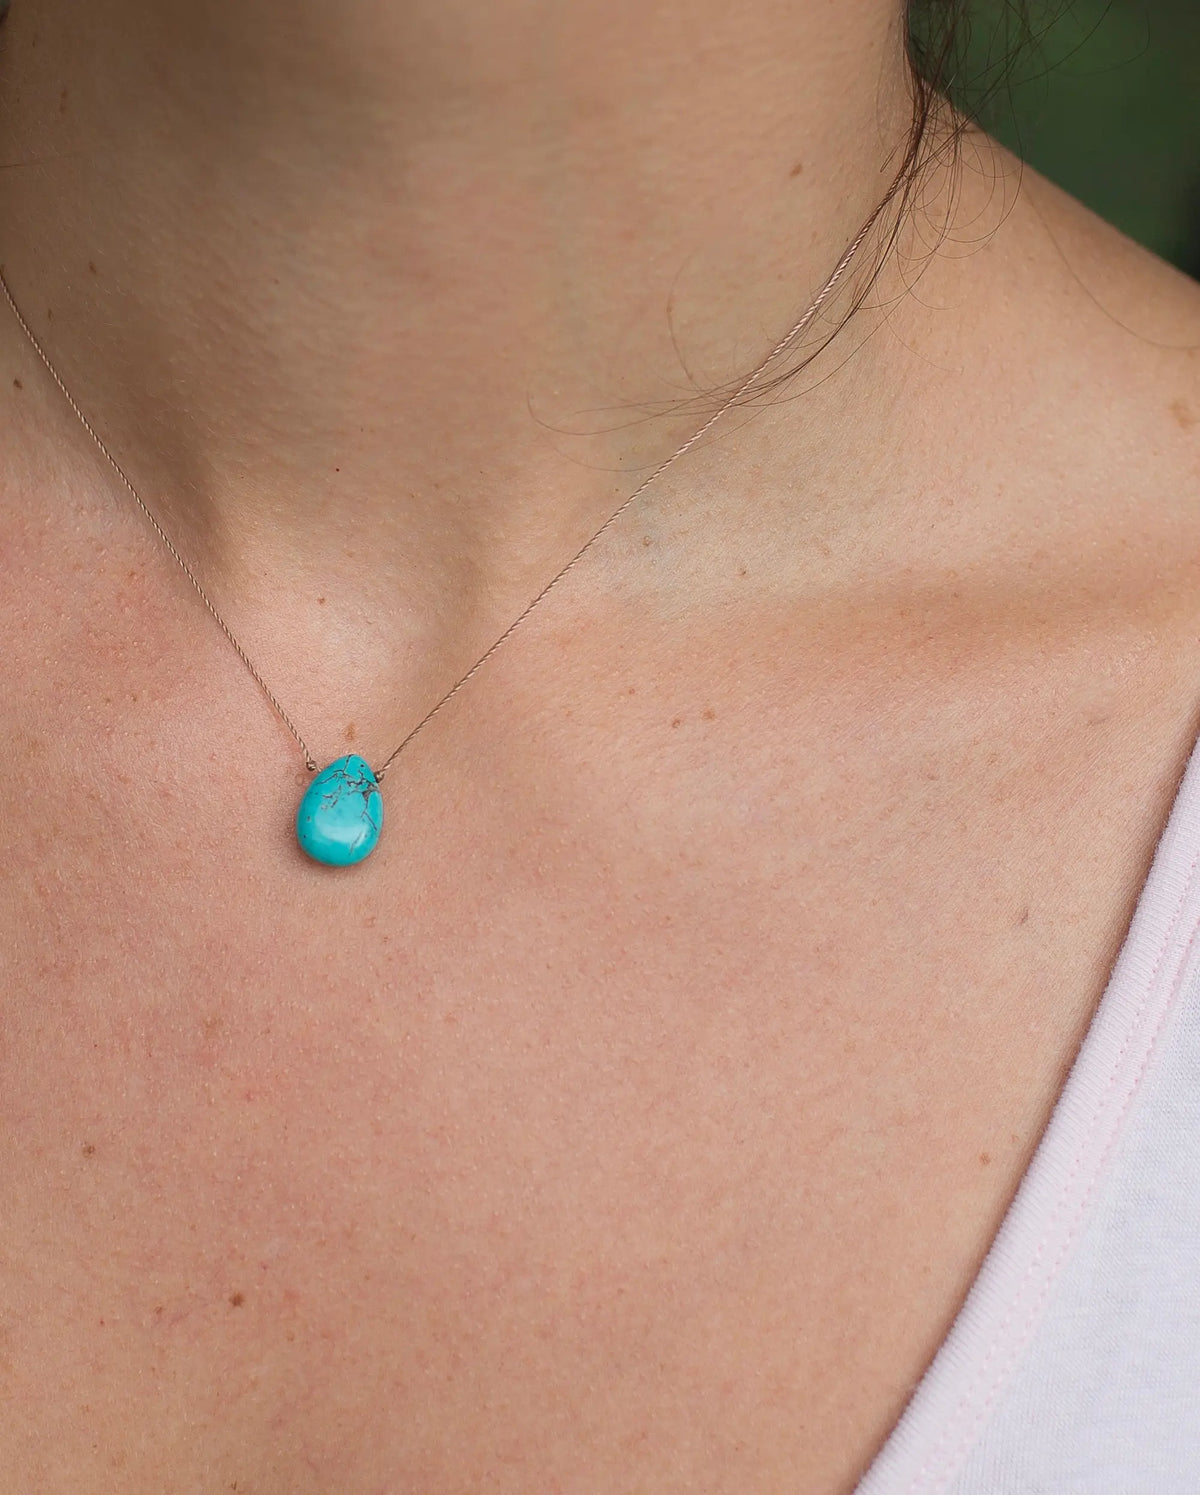 Patience Soul-Full of Light Necklace - Howlite Turquoise